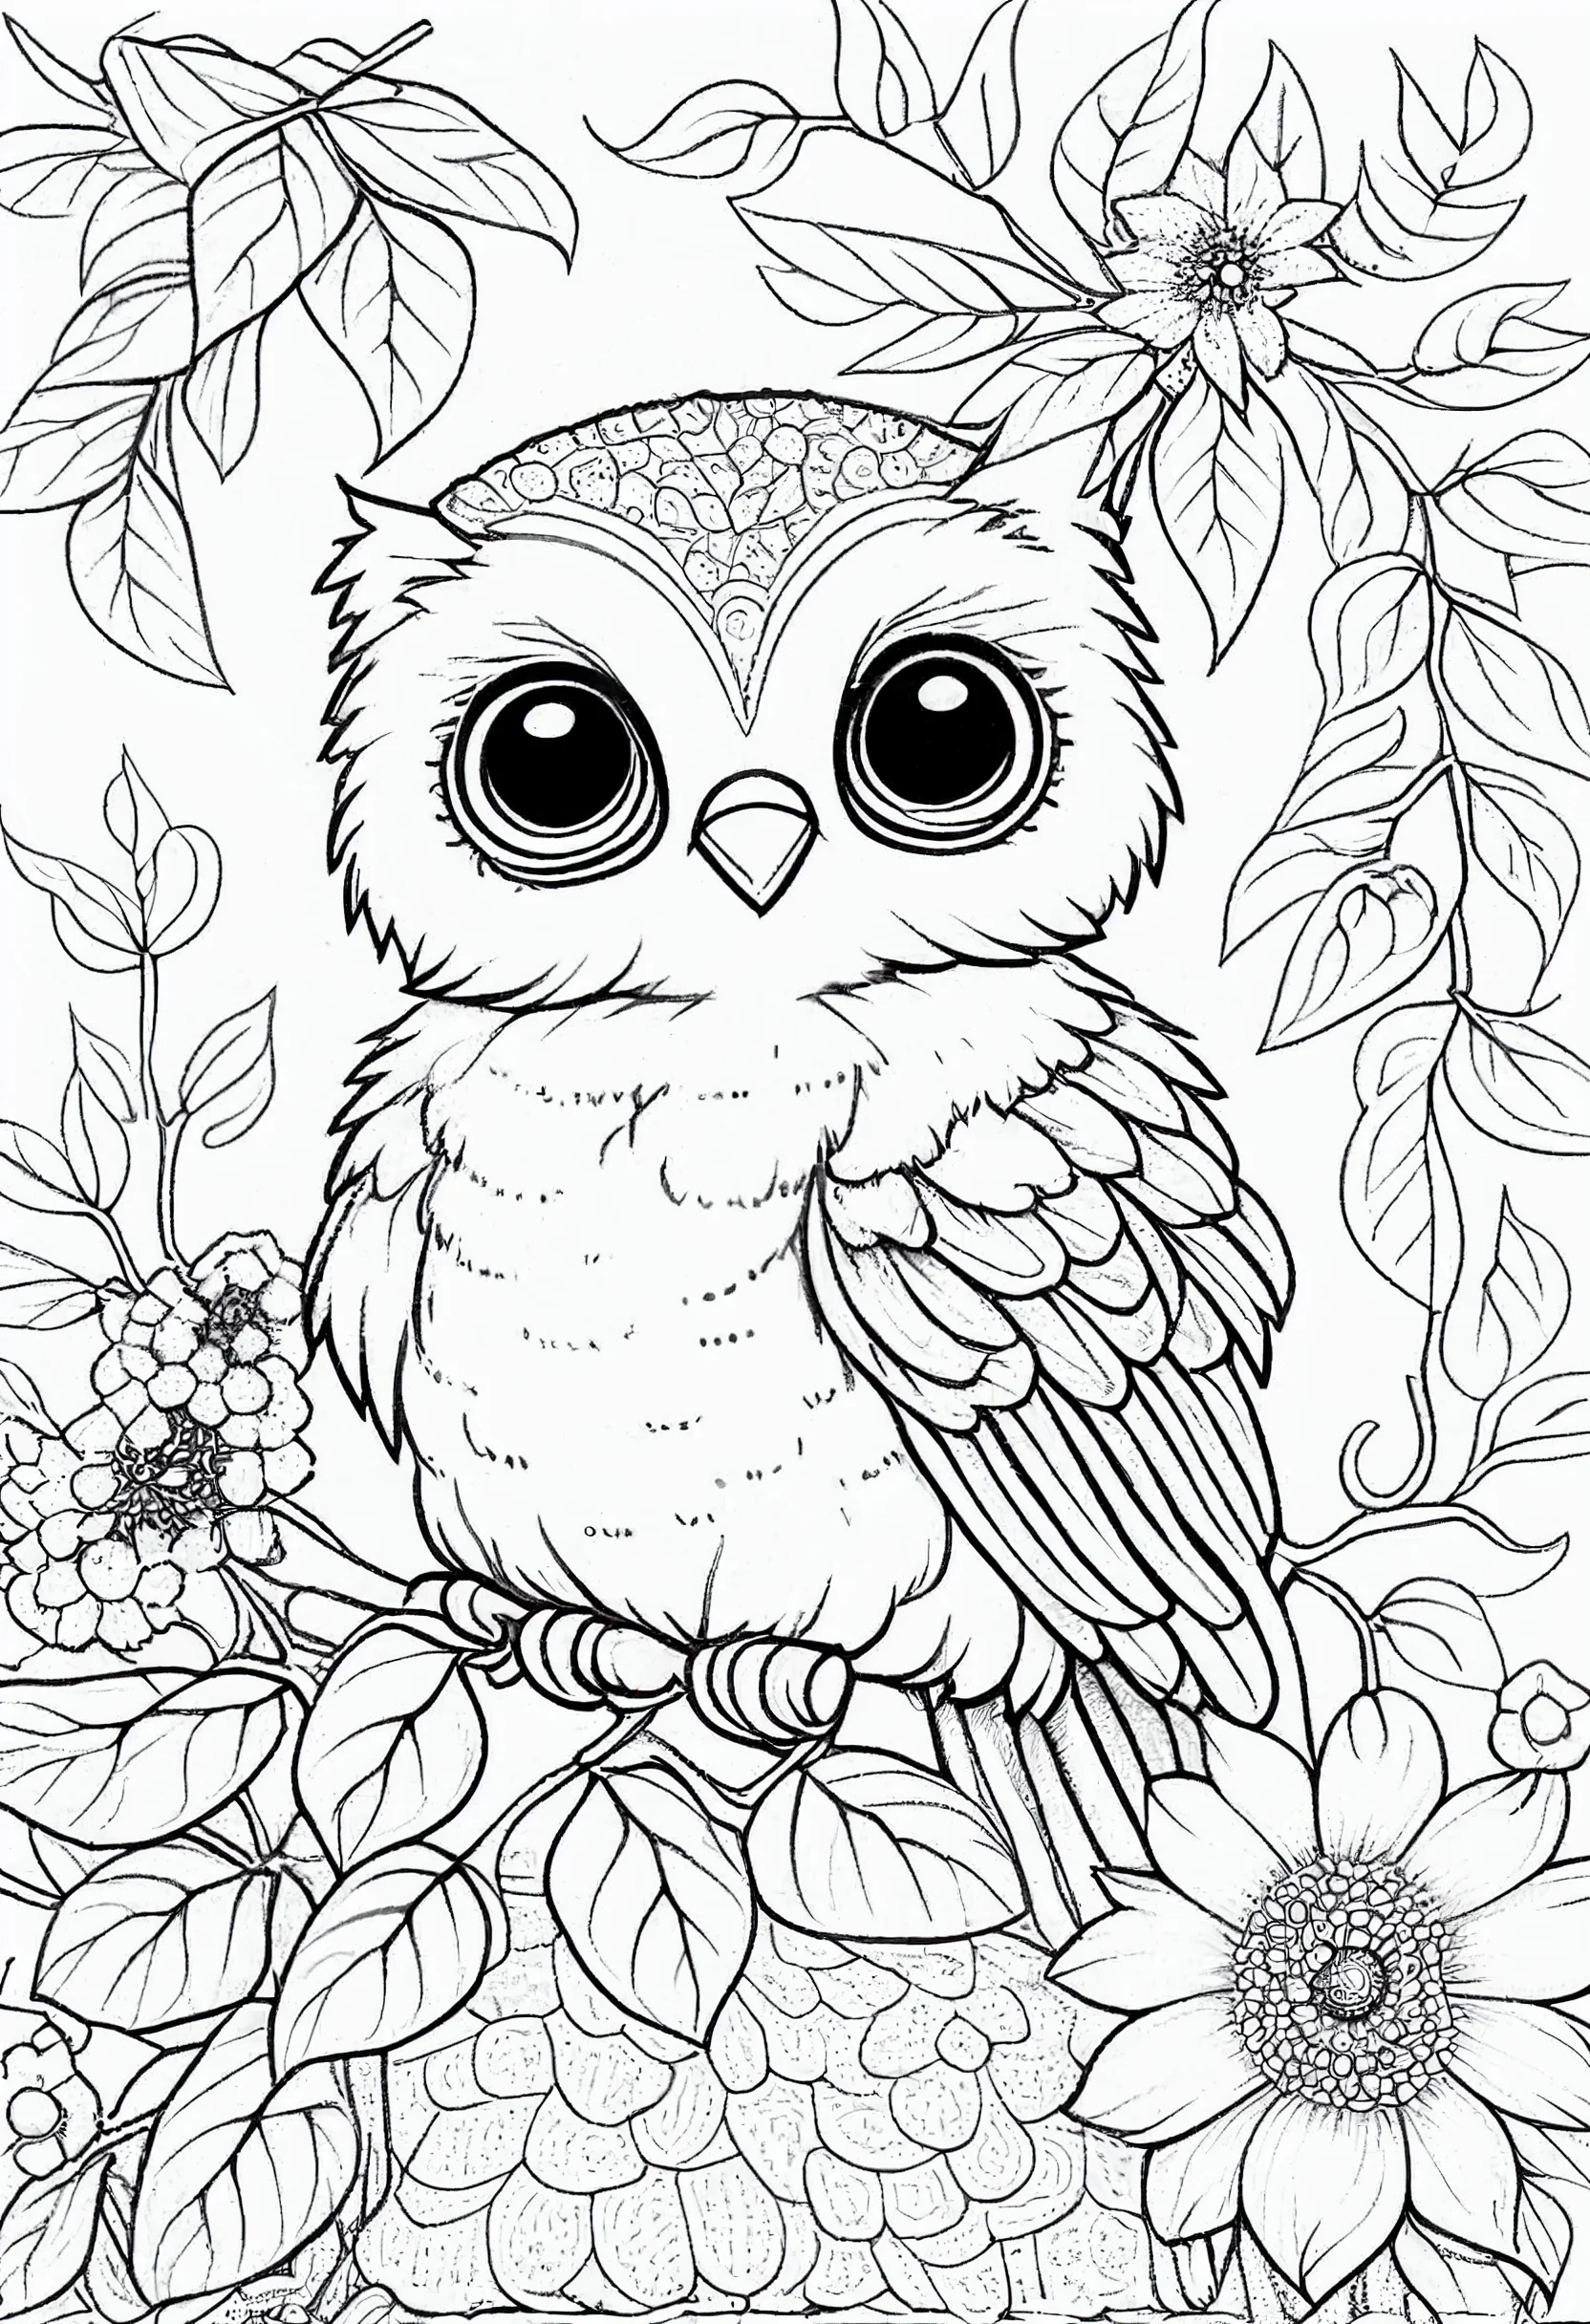 Cute coloring pages for adults